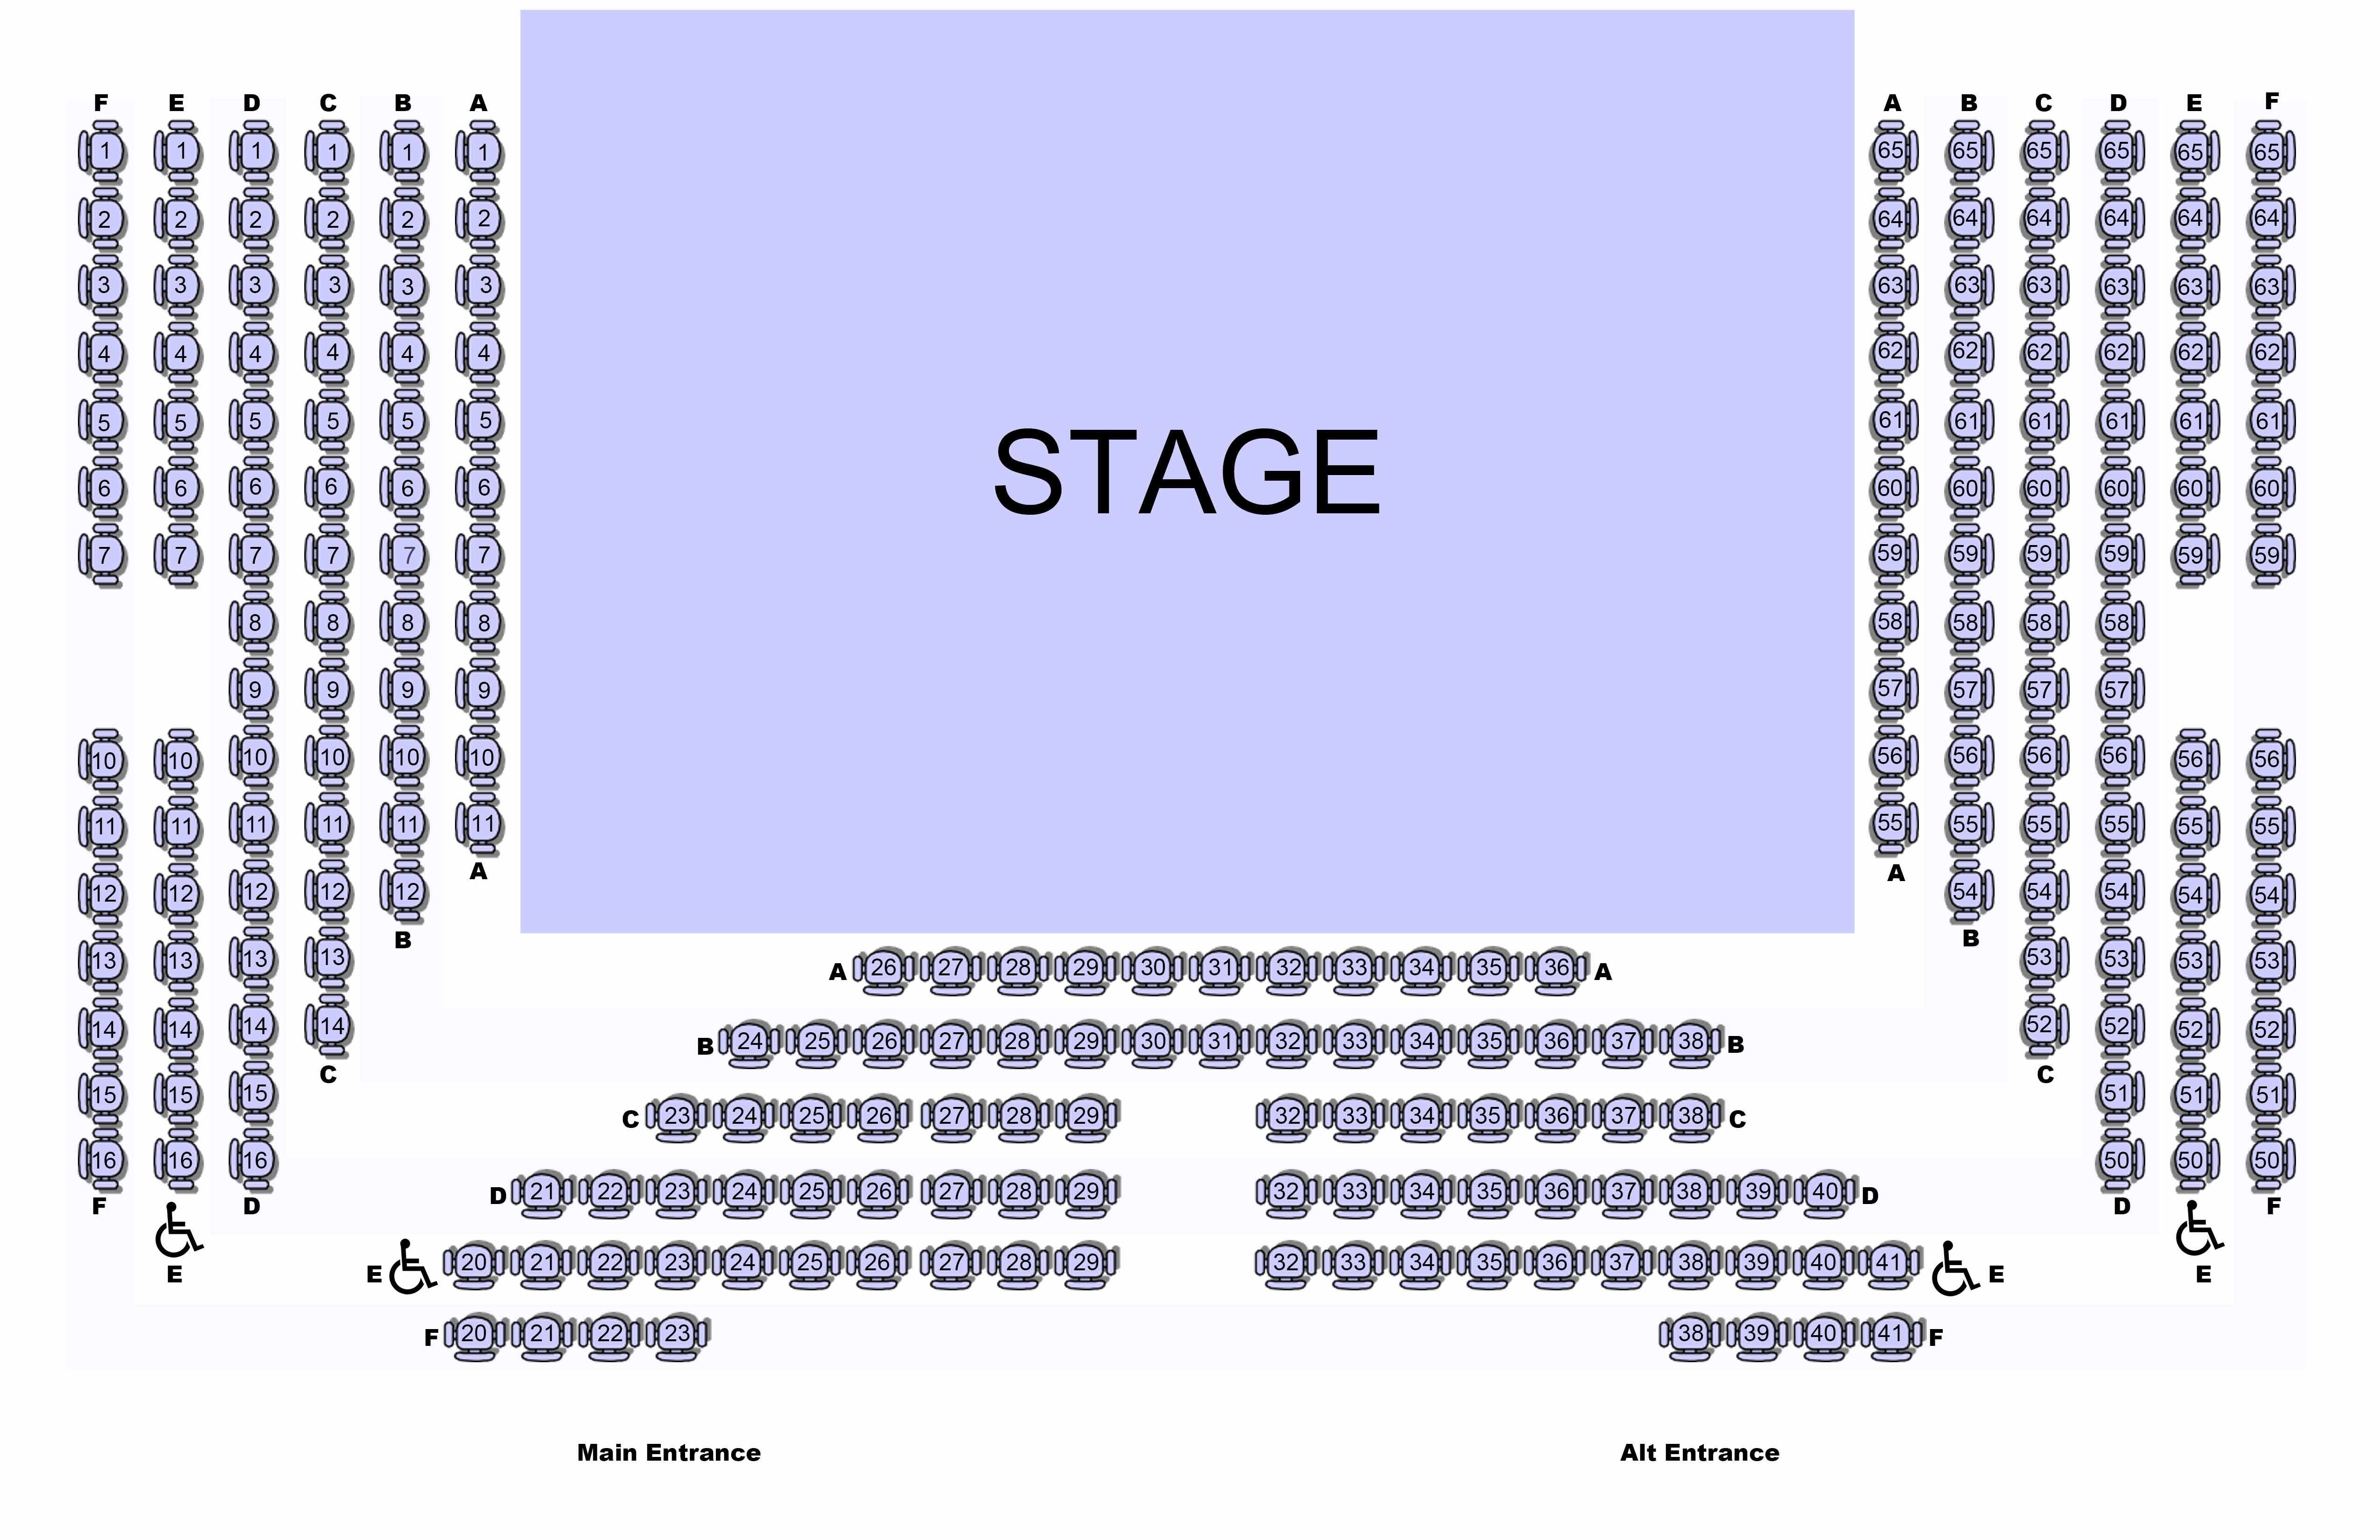 Seating chart for the theatre